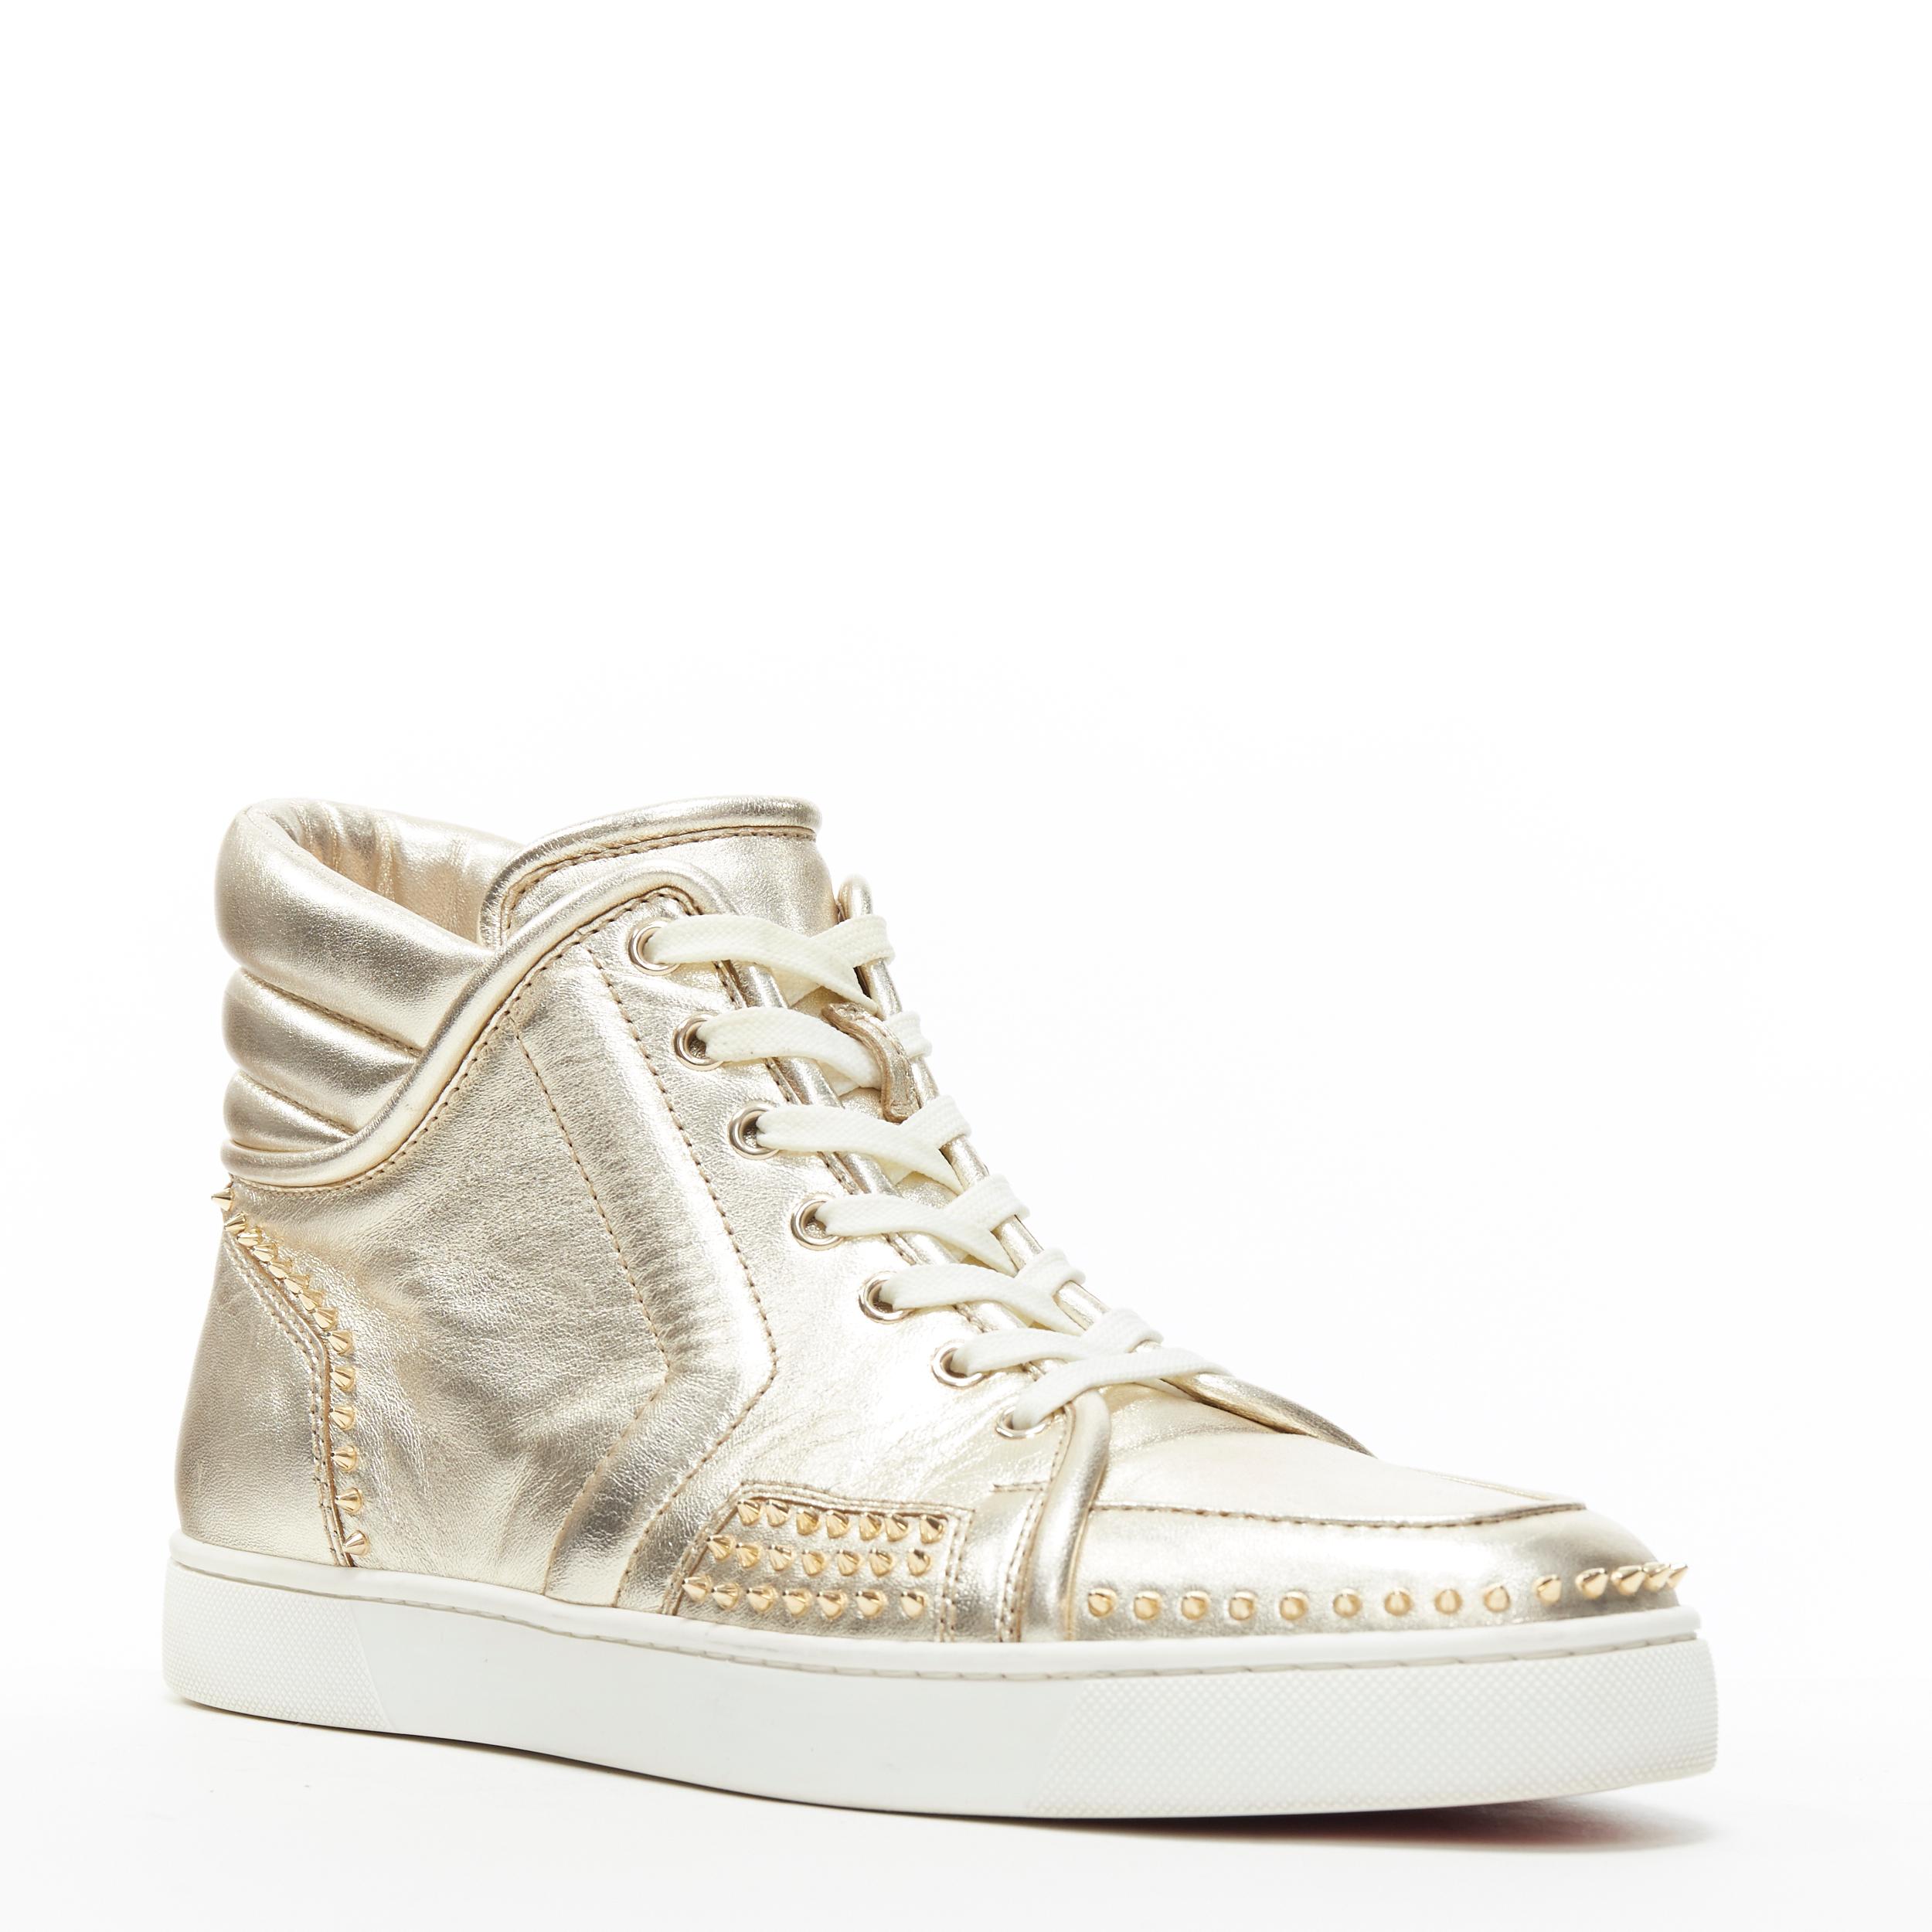 CHRISTIAN LOUBOUTIN light metallic gold spike studded high top sneaker EU43.5
Brand: Christian Louboutin
Designer: Christian Louboutin
Model Name / Style: High top sneaker
Material: Leather
Color: Gold
Pattern: Solid
Closure: Lace up
Extra Detail: